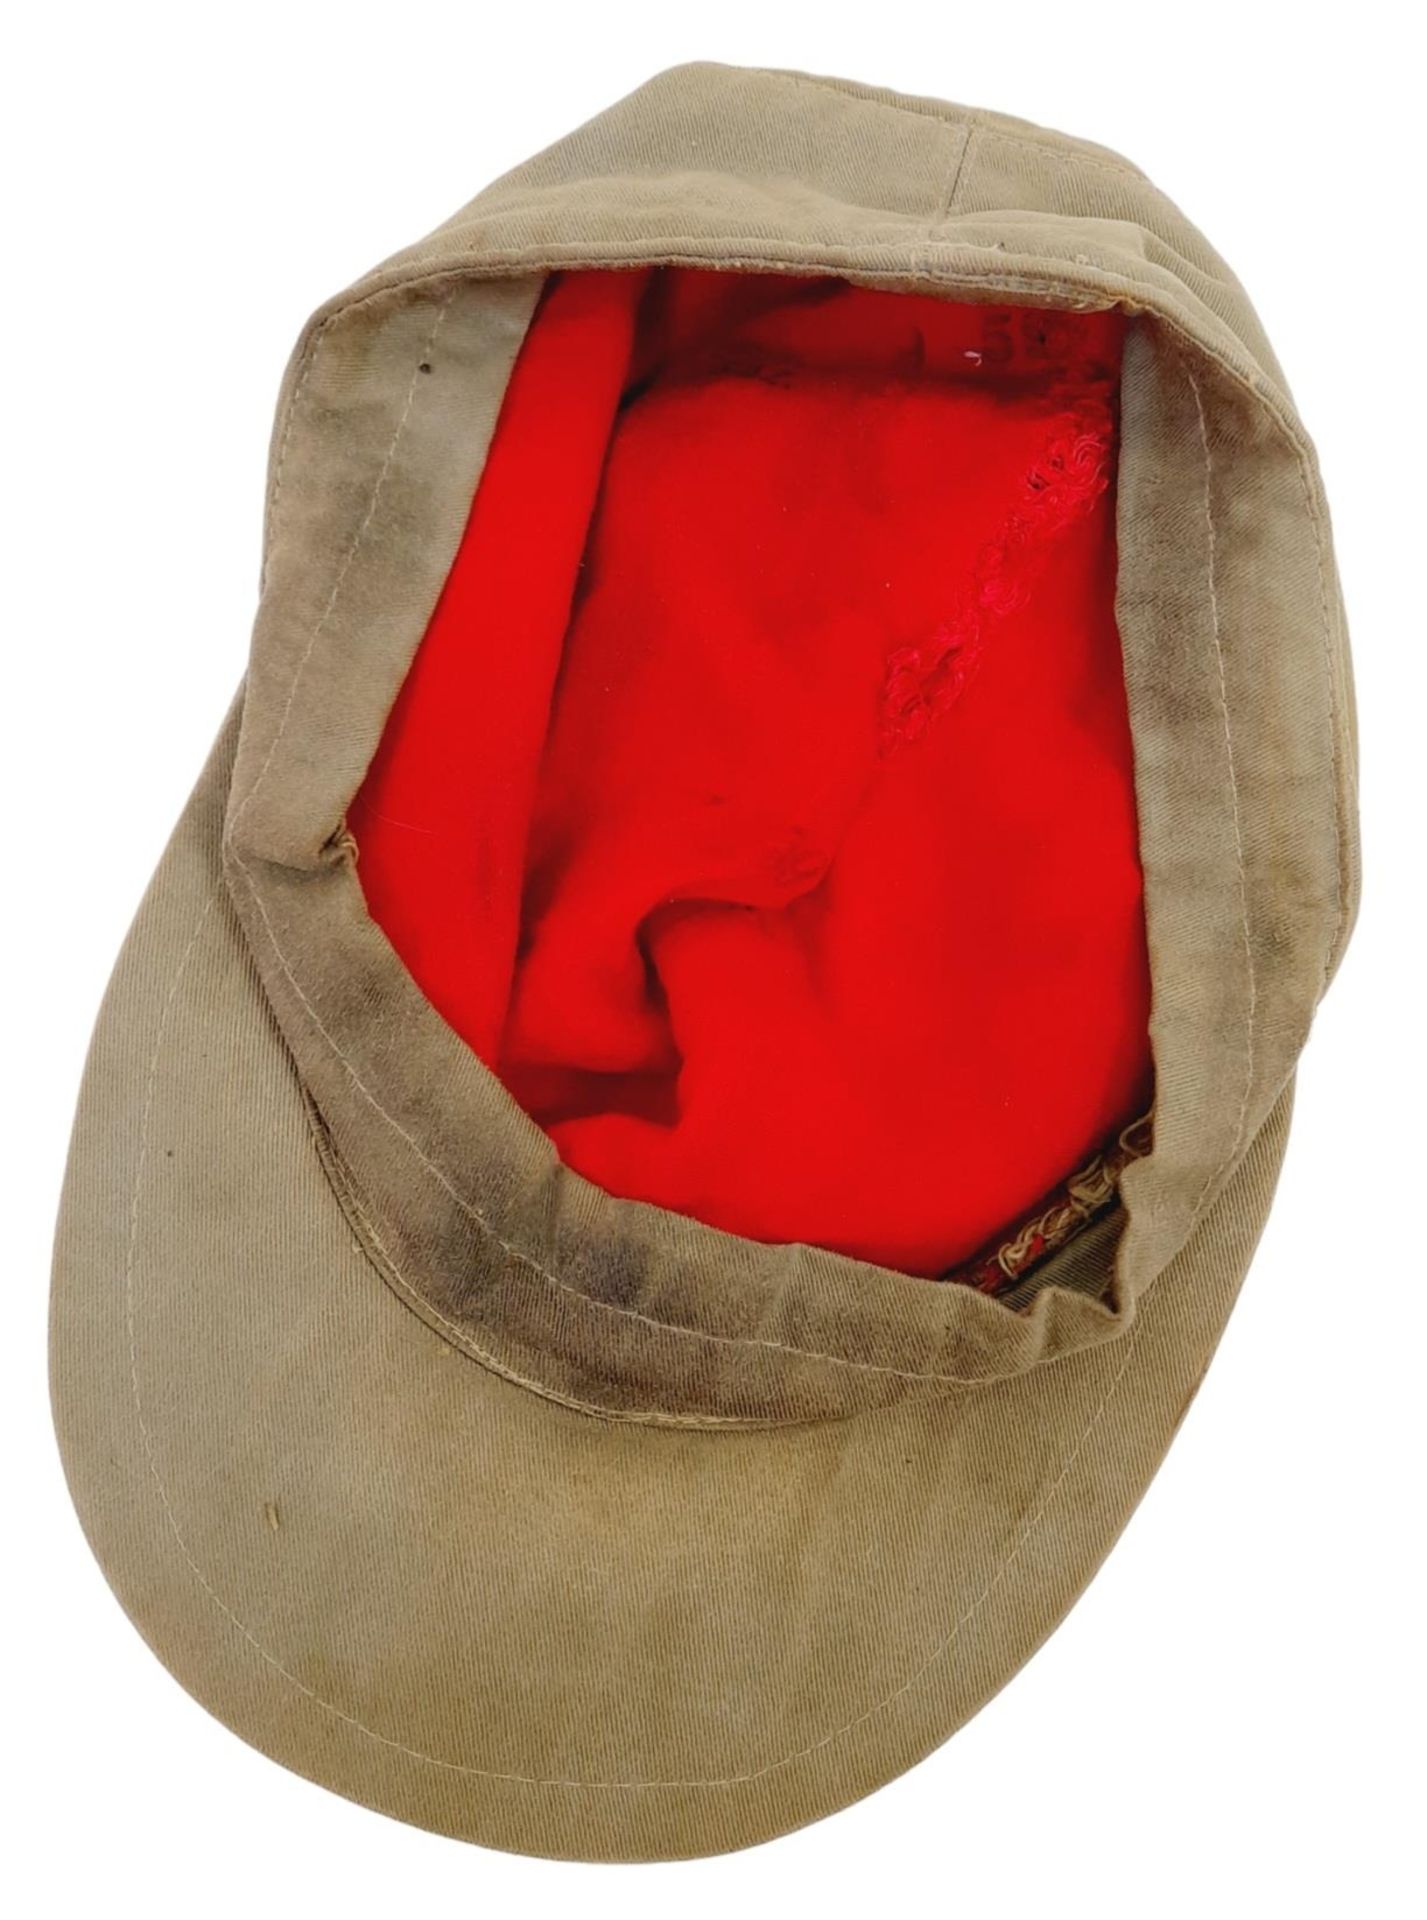 In Country Made Lightweight Africa Corps Artillery Cap. (No Vents) This is a typical example of a - Bild 5 aus 6